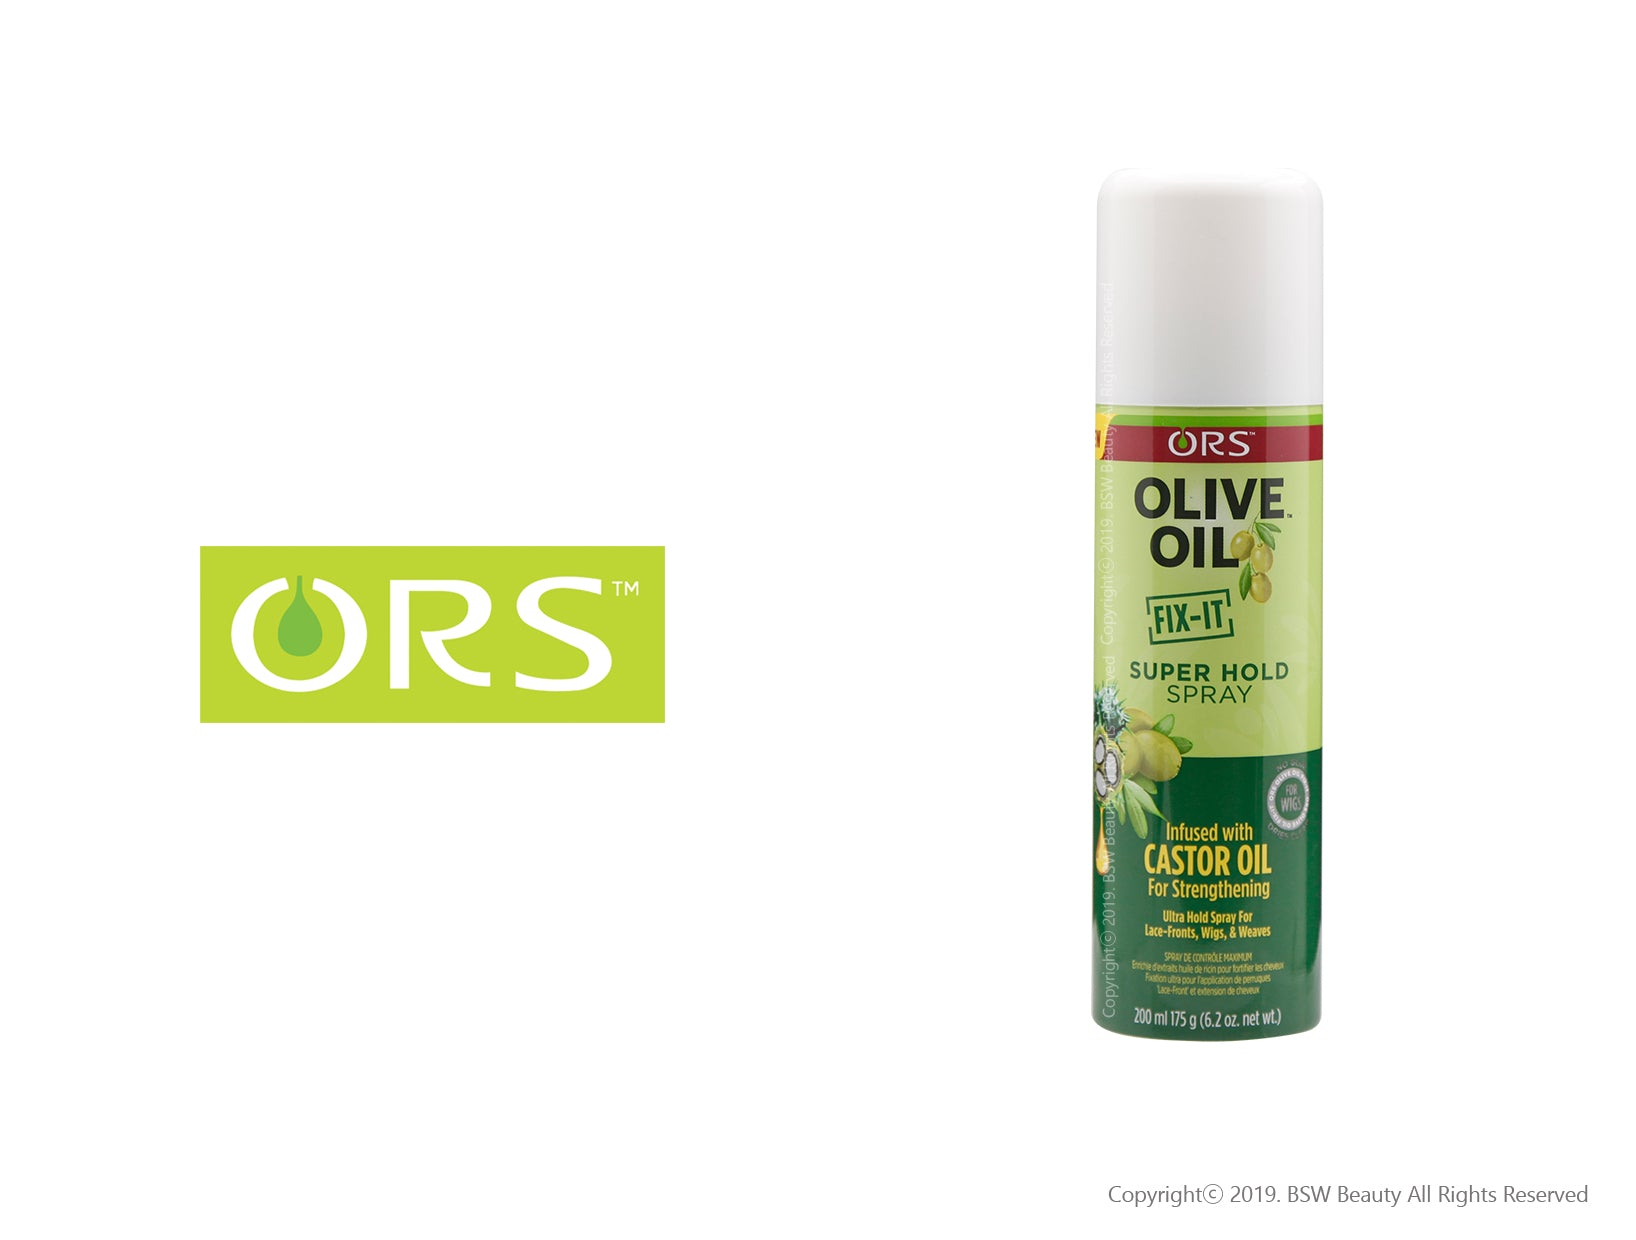 ORS OLIVE OIL FIX-IT SUPER HOLD SPRAY 6.2oz